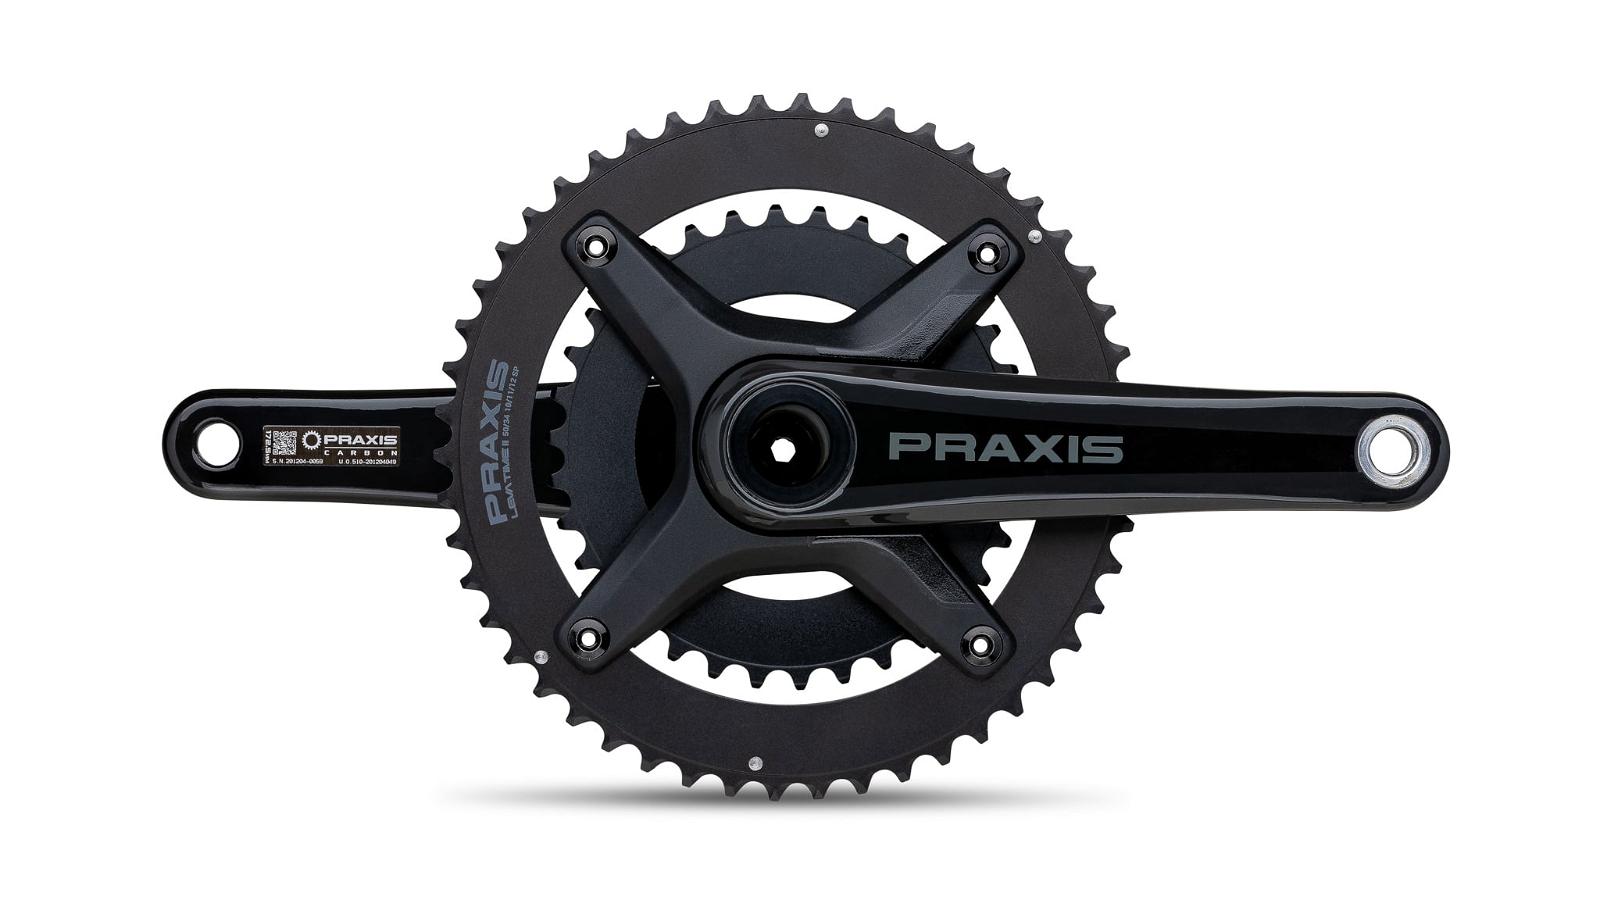 BB専用工具は付属しますかPraxisWorks ZAYANTE CARBON-S 50/34 170mm